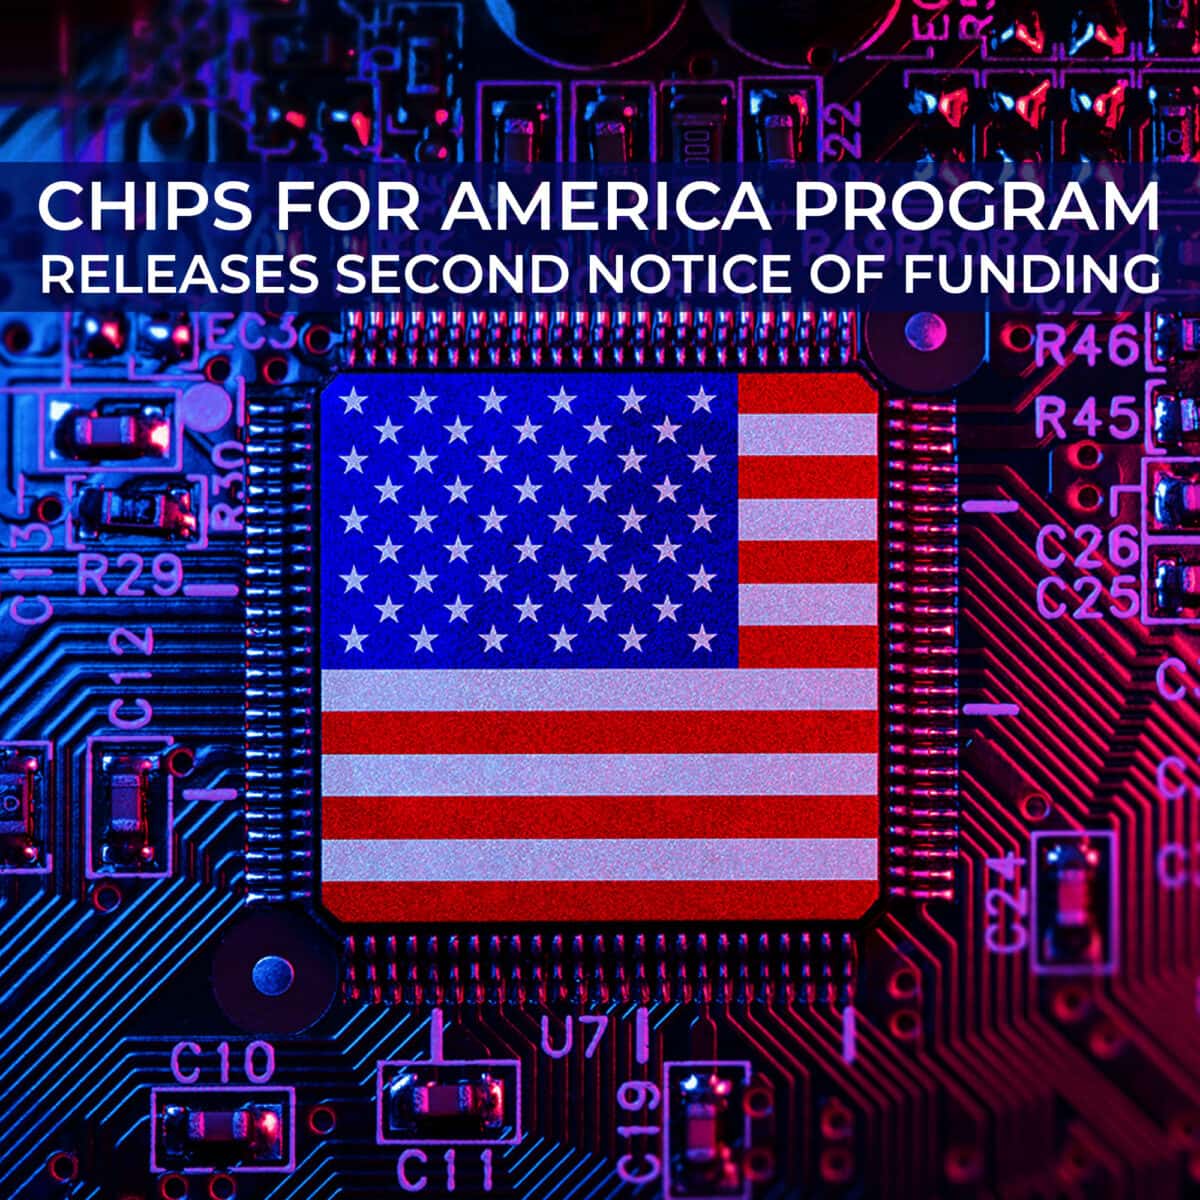 The CHIPS Program Is Progressing with More Funding Opportunities